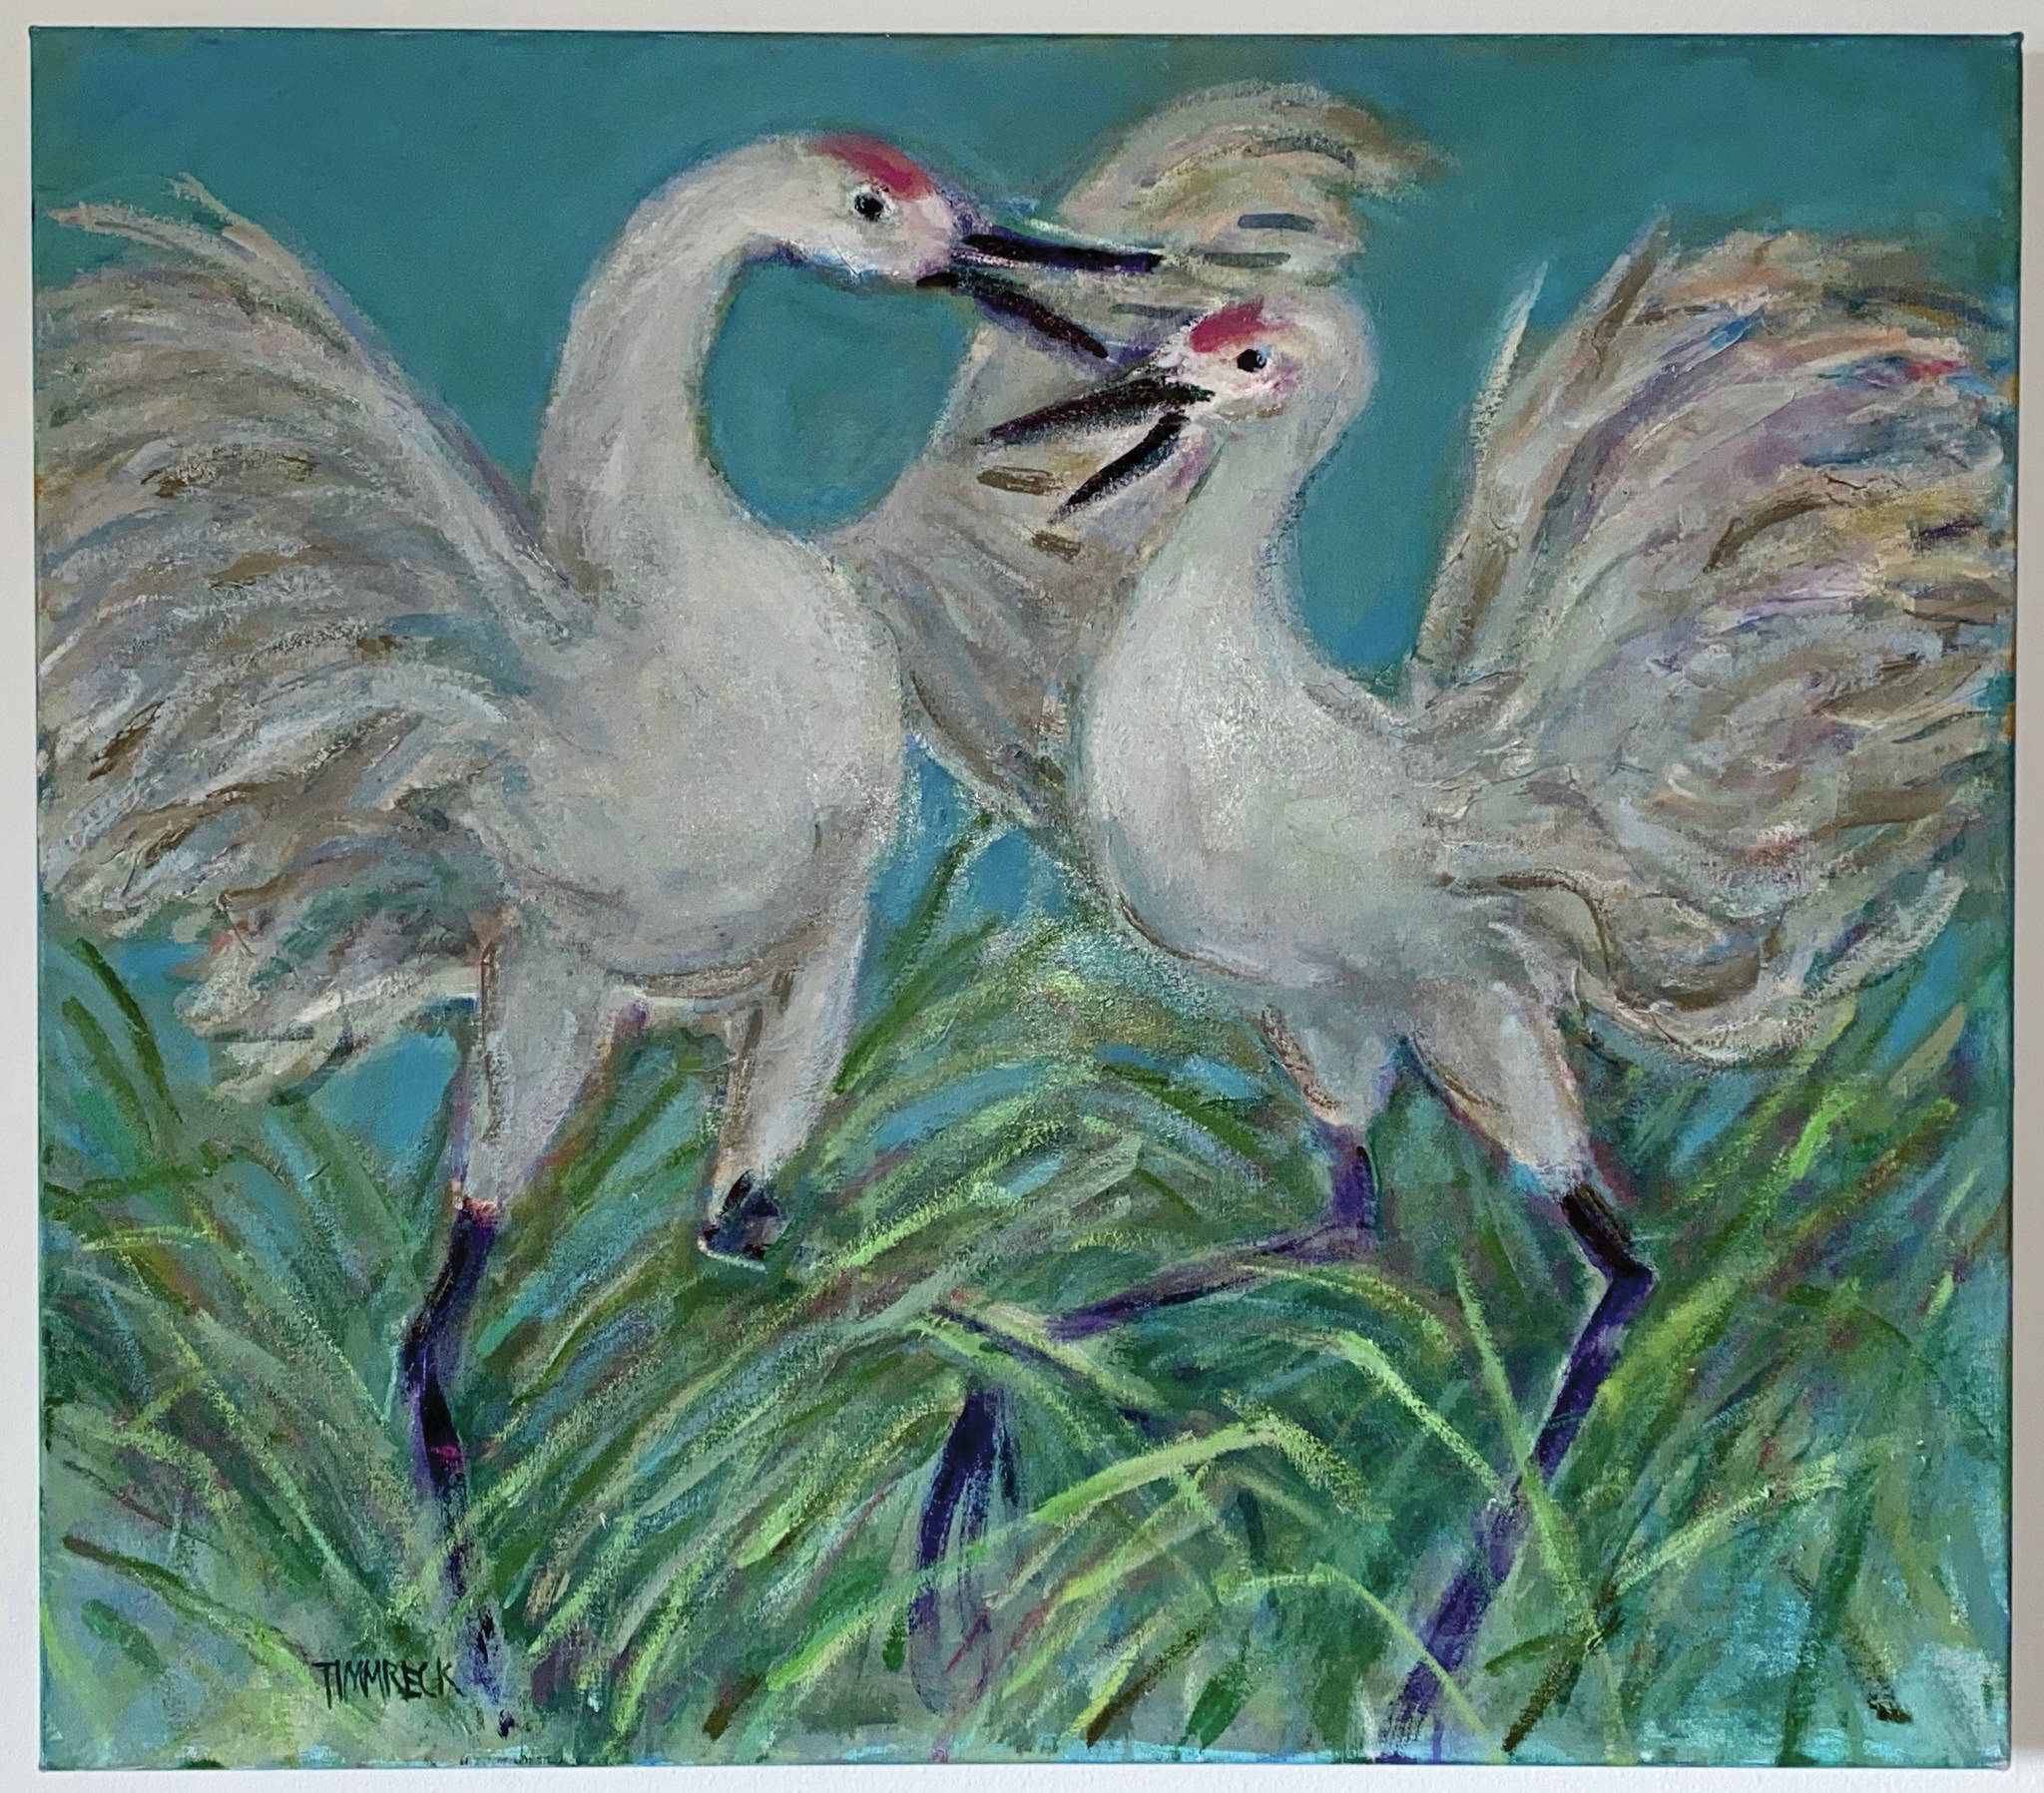 Shirley Timmreck’s “Dancing Cranes” is one of the works of art shown at Grace Ridge Brewery for its October 2020 show benefiting South Peninsula Haven House in Homer, Alaska. (Photo courtesy of South Peninsula Haven House)